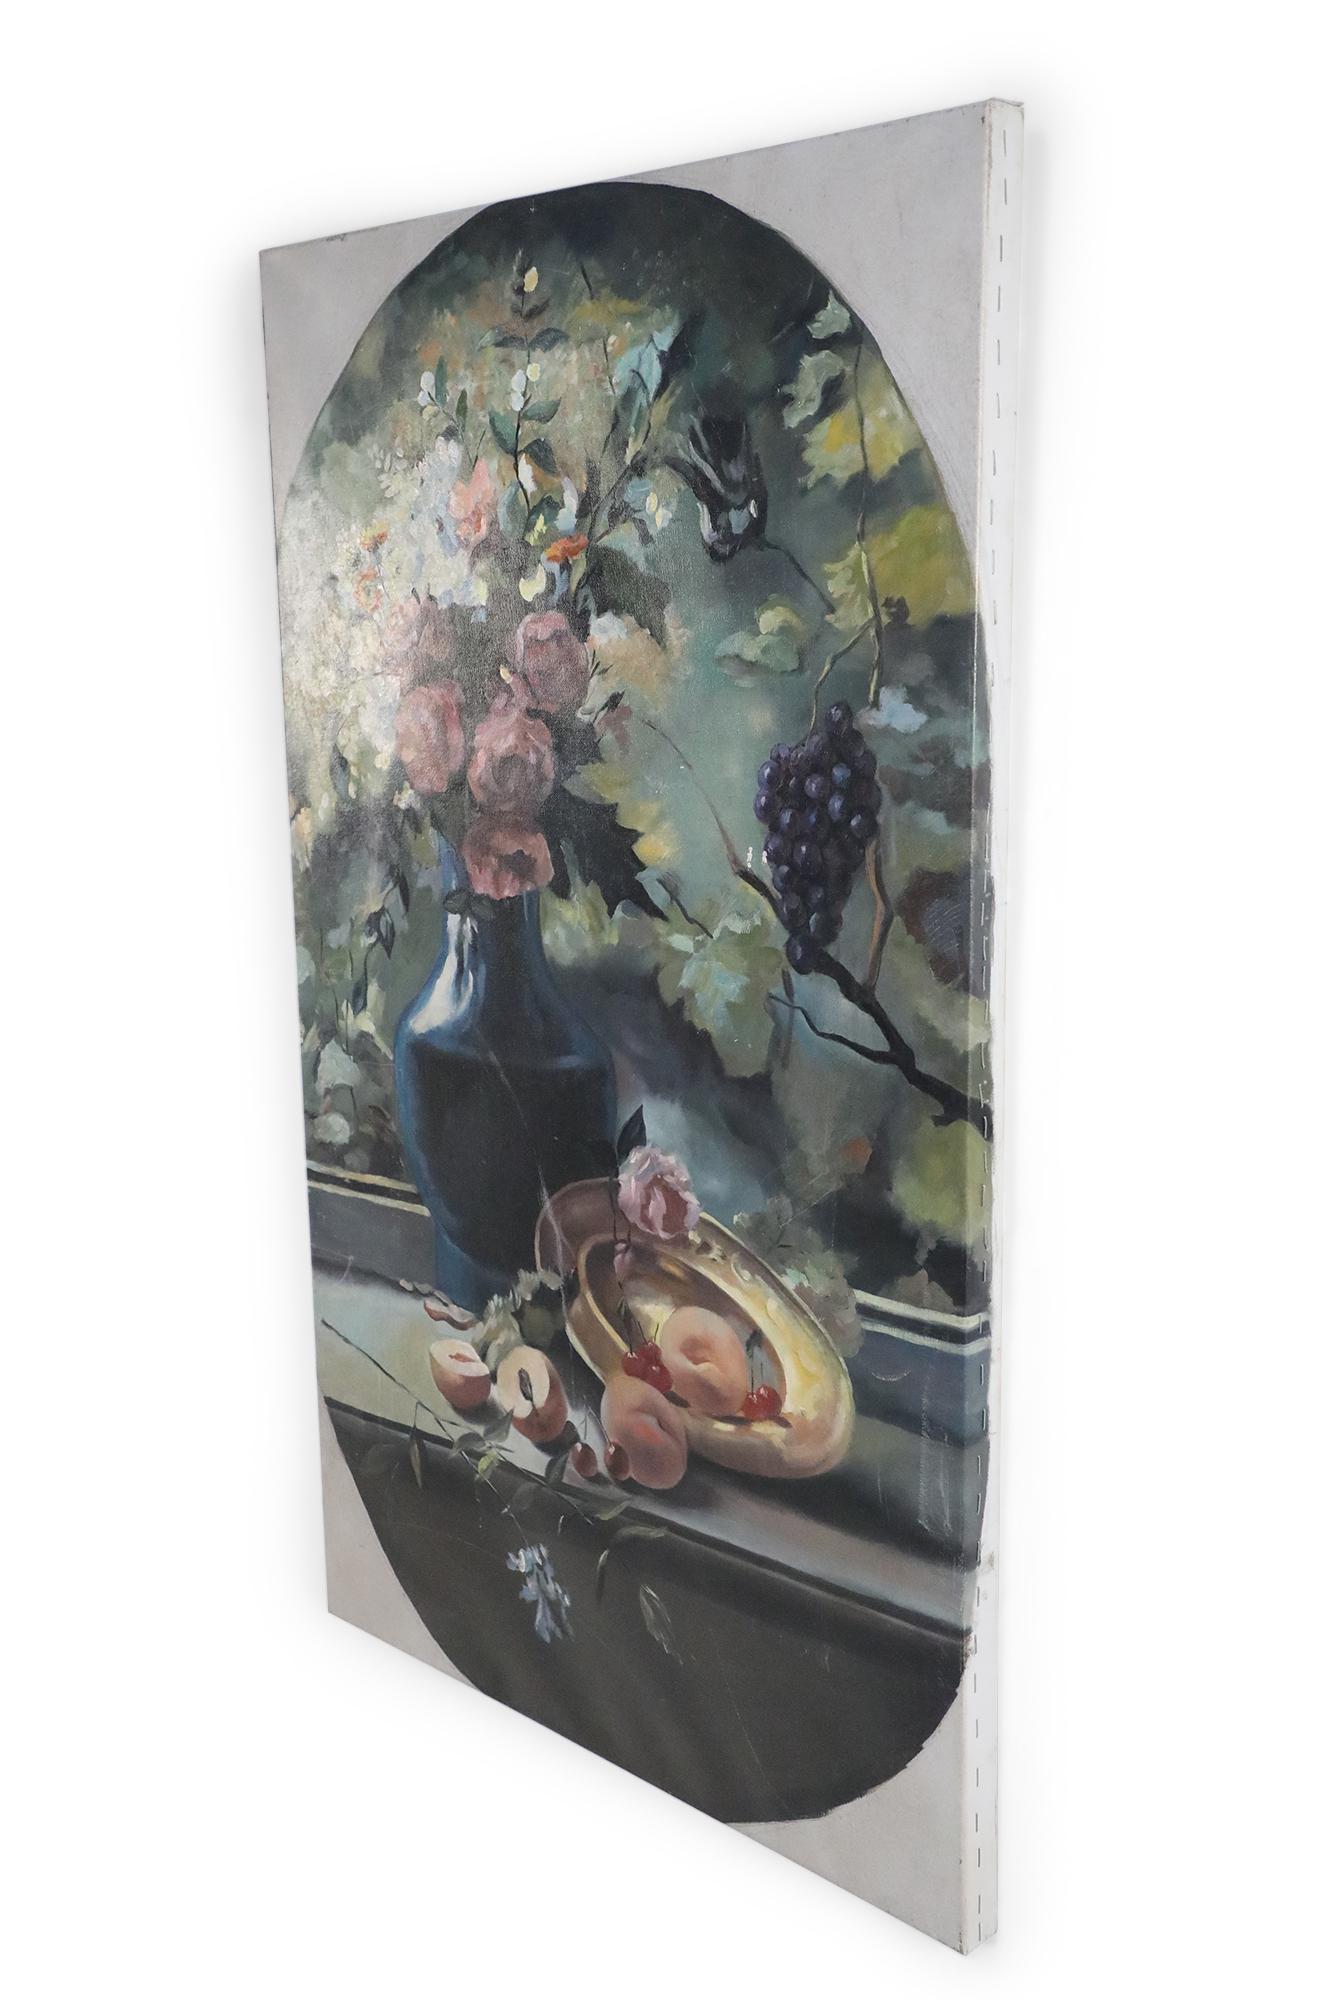 Vintage (20th Century) unframed canvas still life oil painting depicting a blue vase filled with blossoming pink, yellow and white florals behind a golden tray, spilling peaches and cherries onto the surface, and a natural setting with grape vines